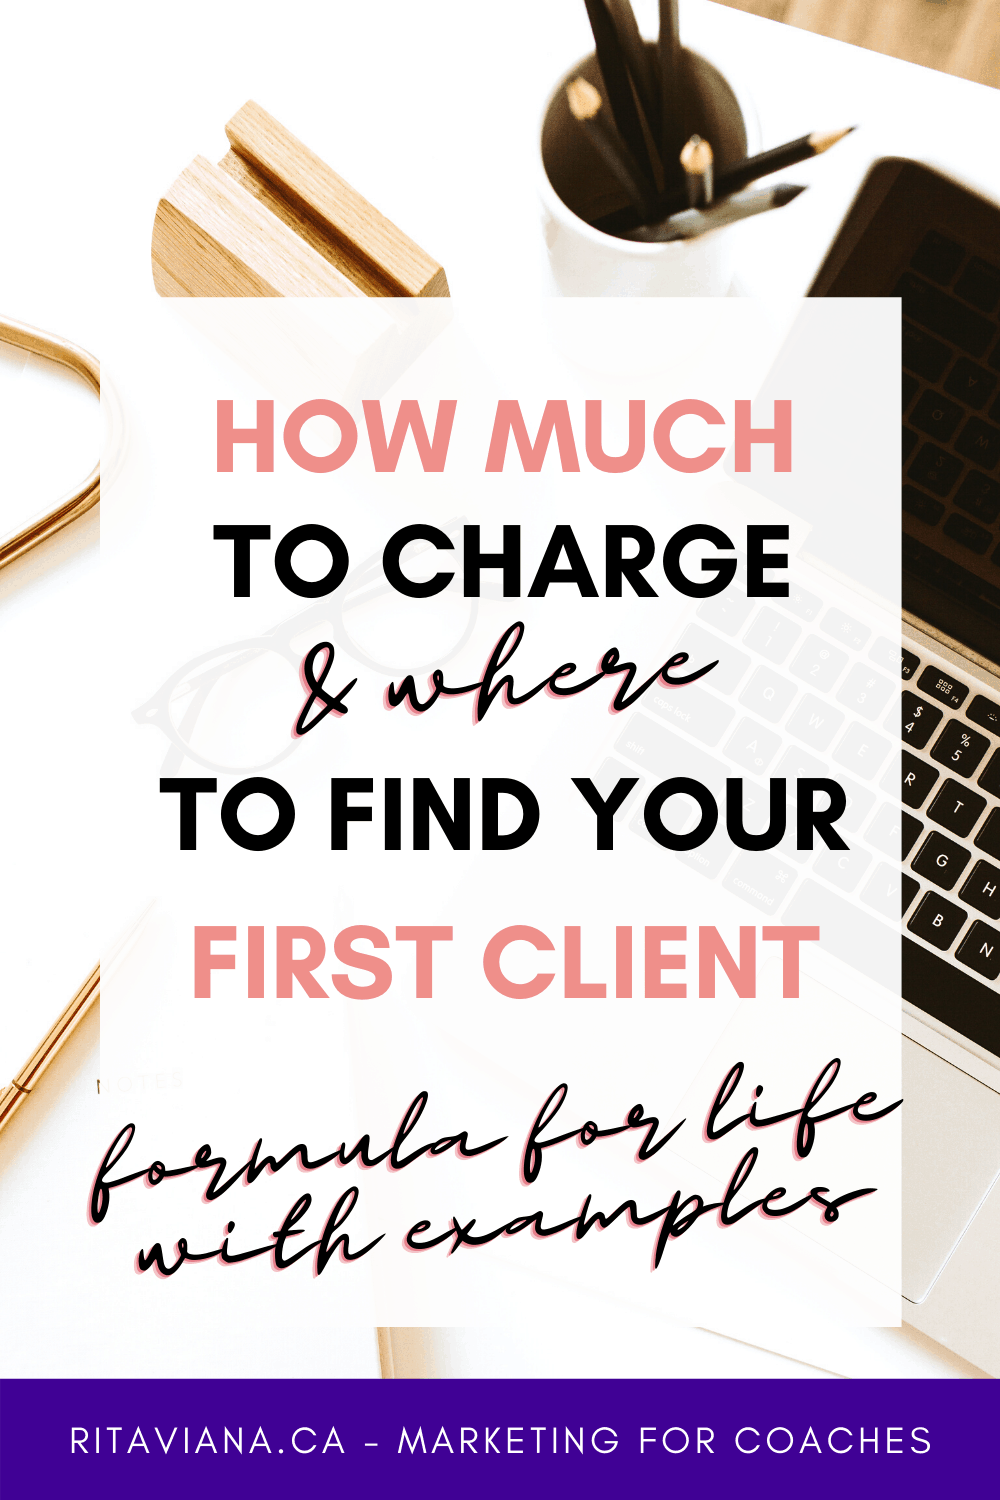 howmuch to charge and where to find your first client